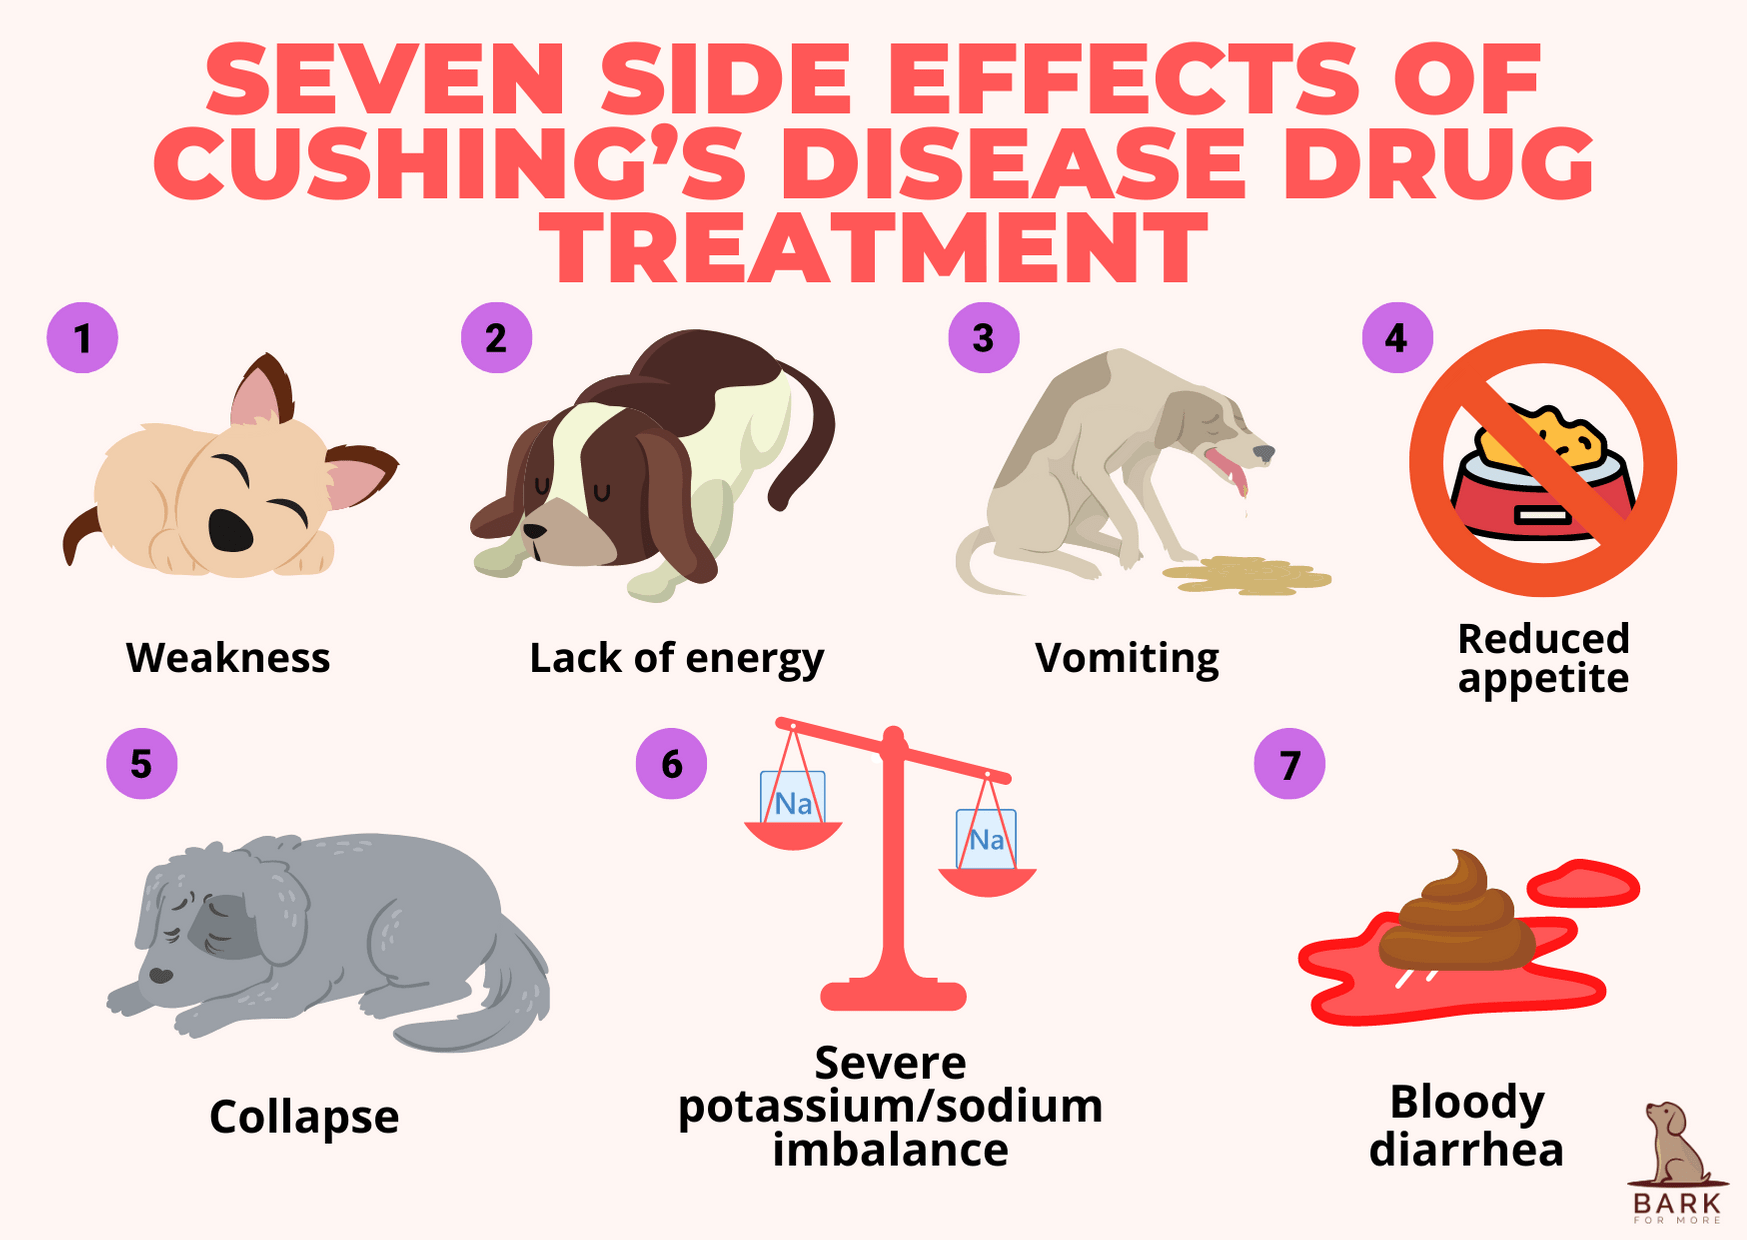 Side effects of Cushing’s disease drug treatment